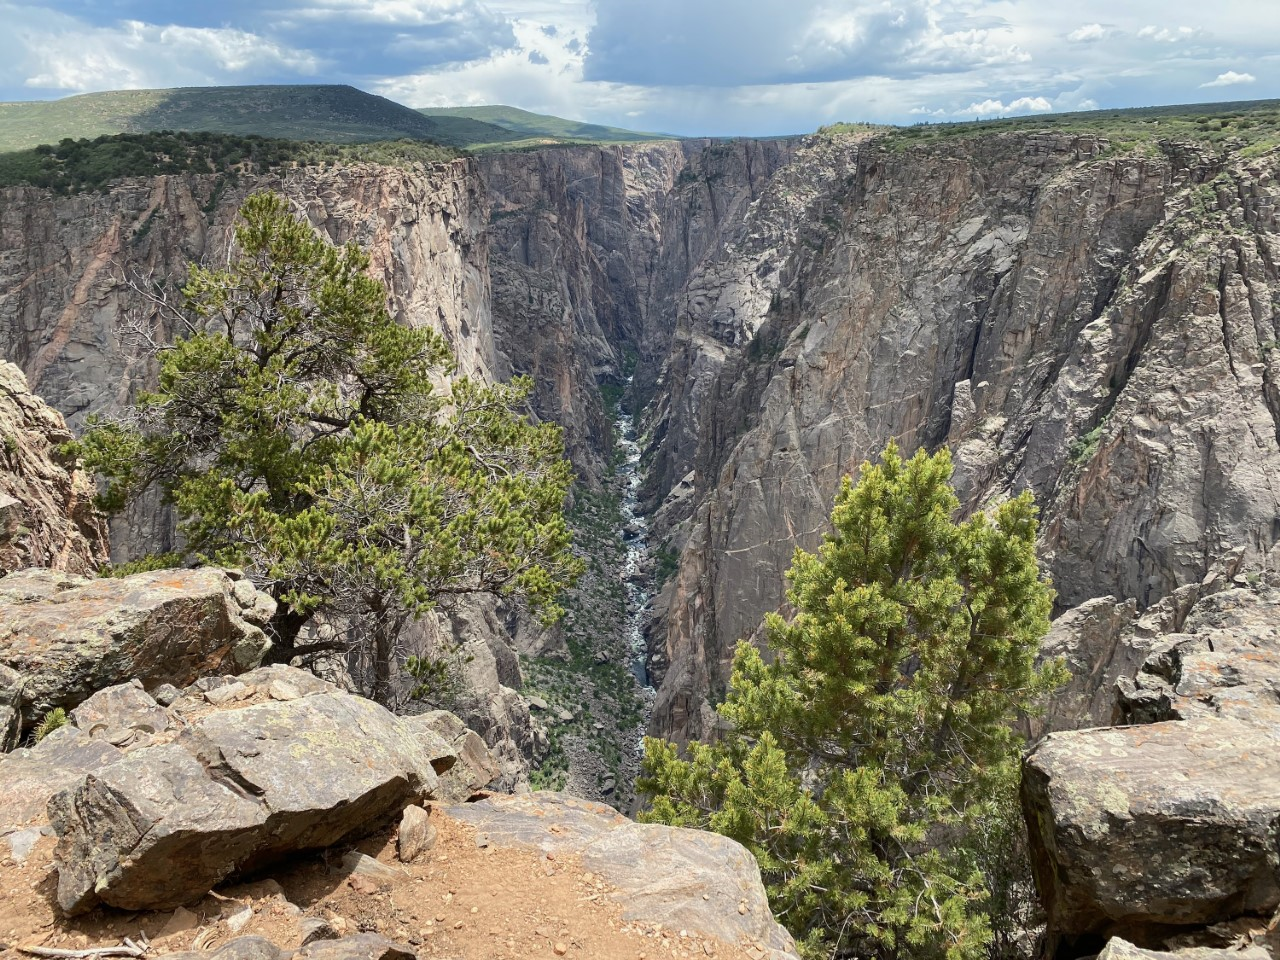 Exclamation Point view at Black Canyon of the Gunnison National Park